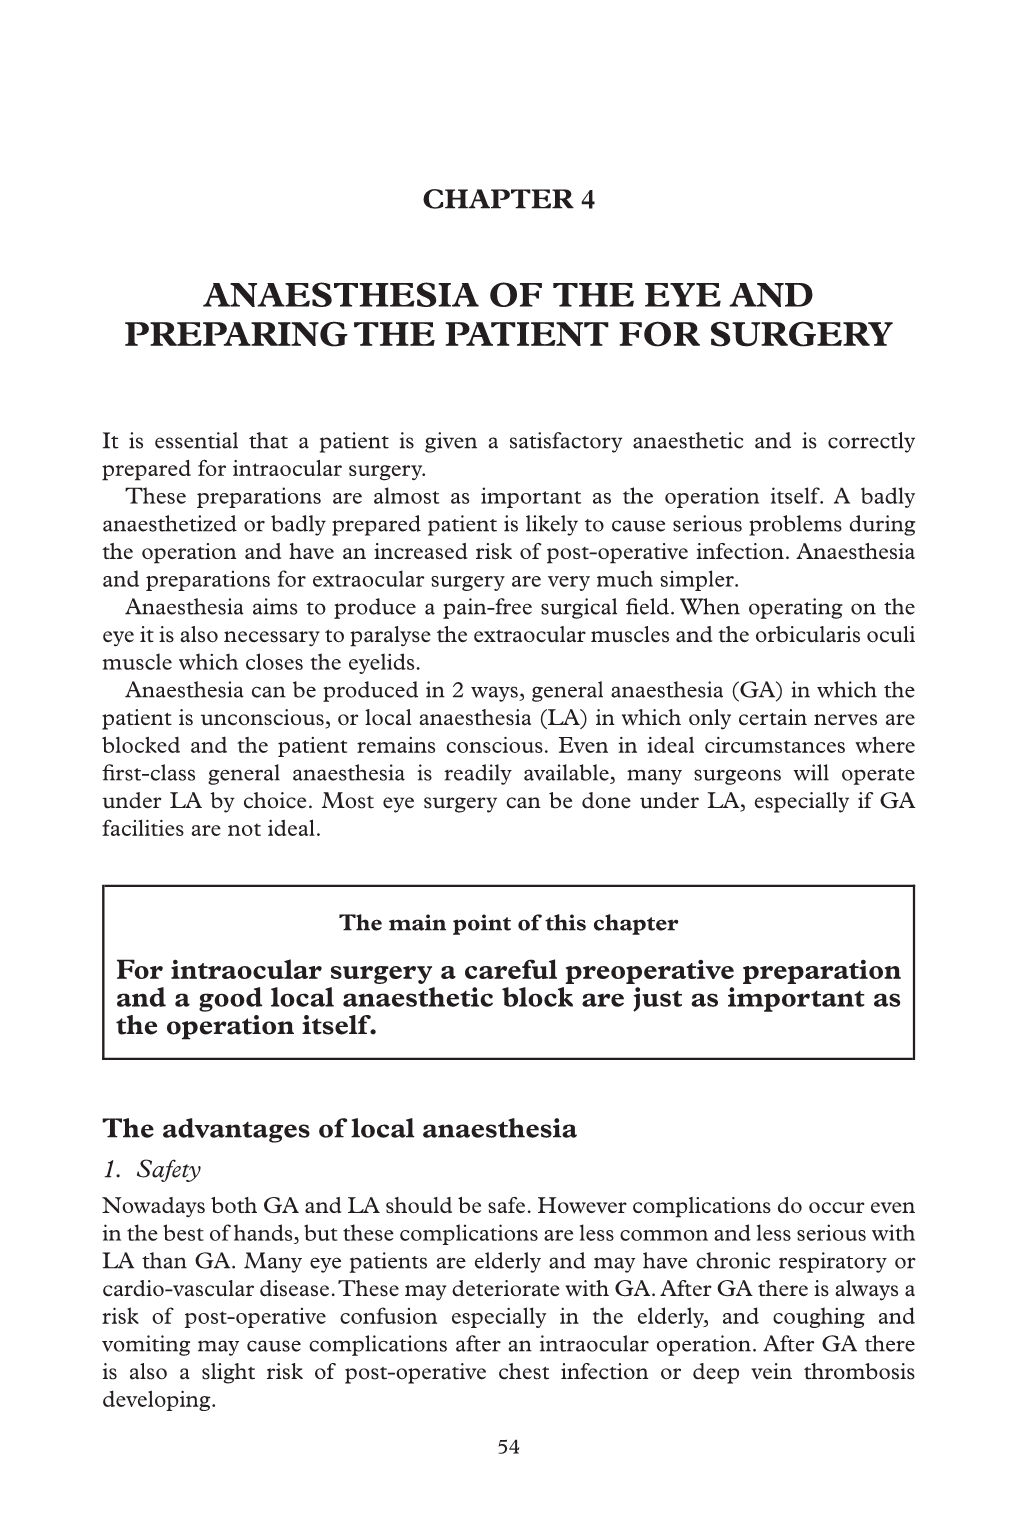 Anaesthesia of the Eye and Preparing the Patient for Surgery 55